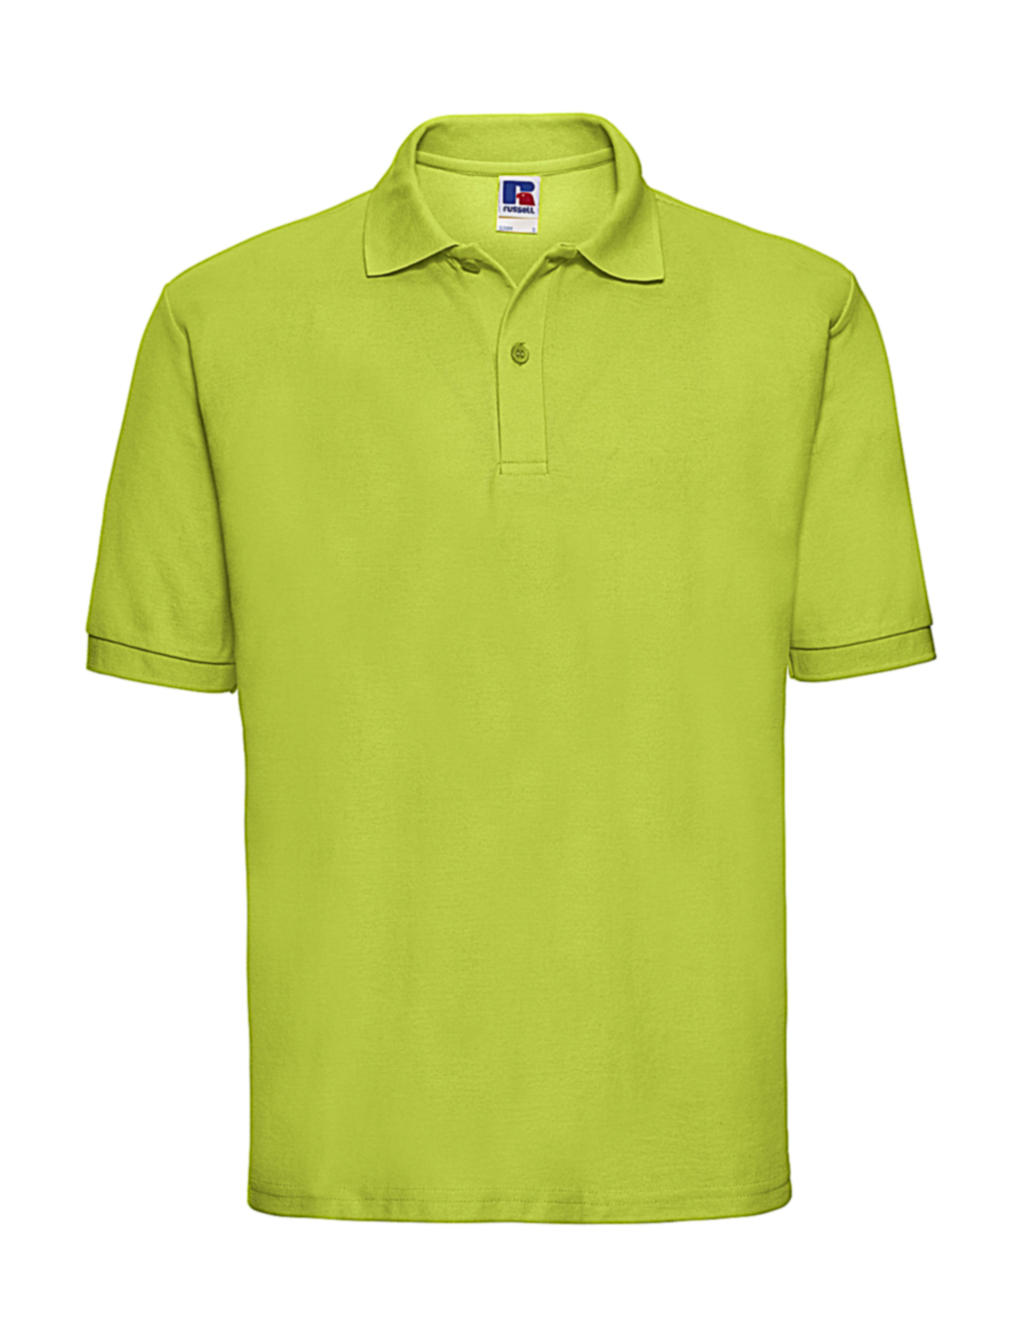  Mens Classic Polycotton Polo in Farbe Lime